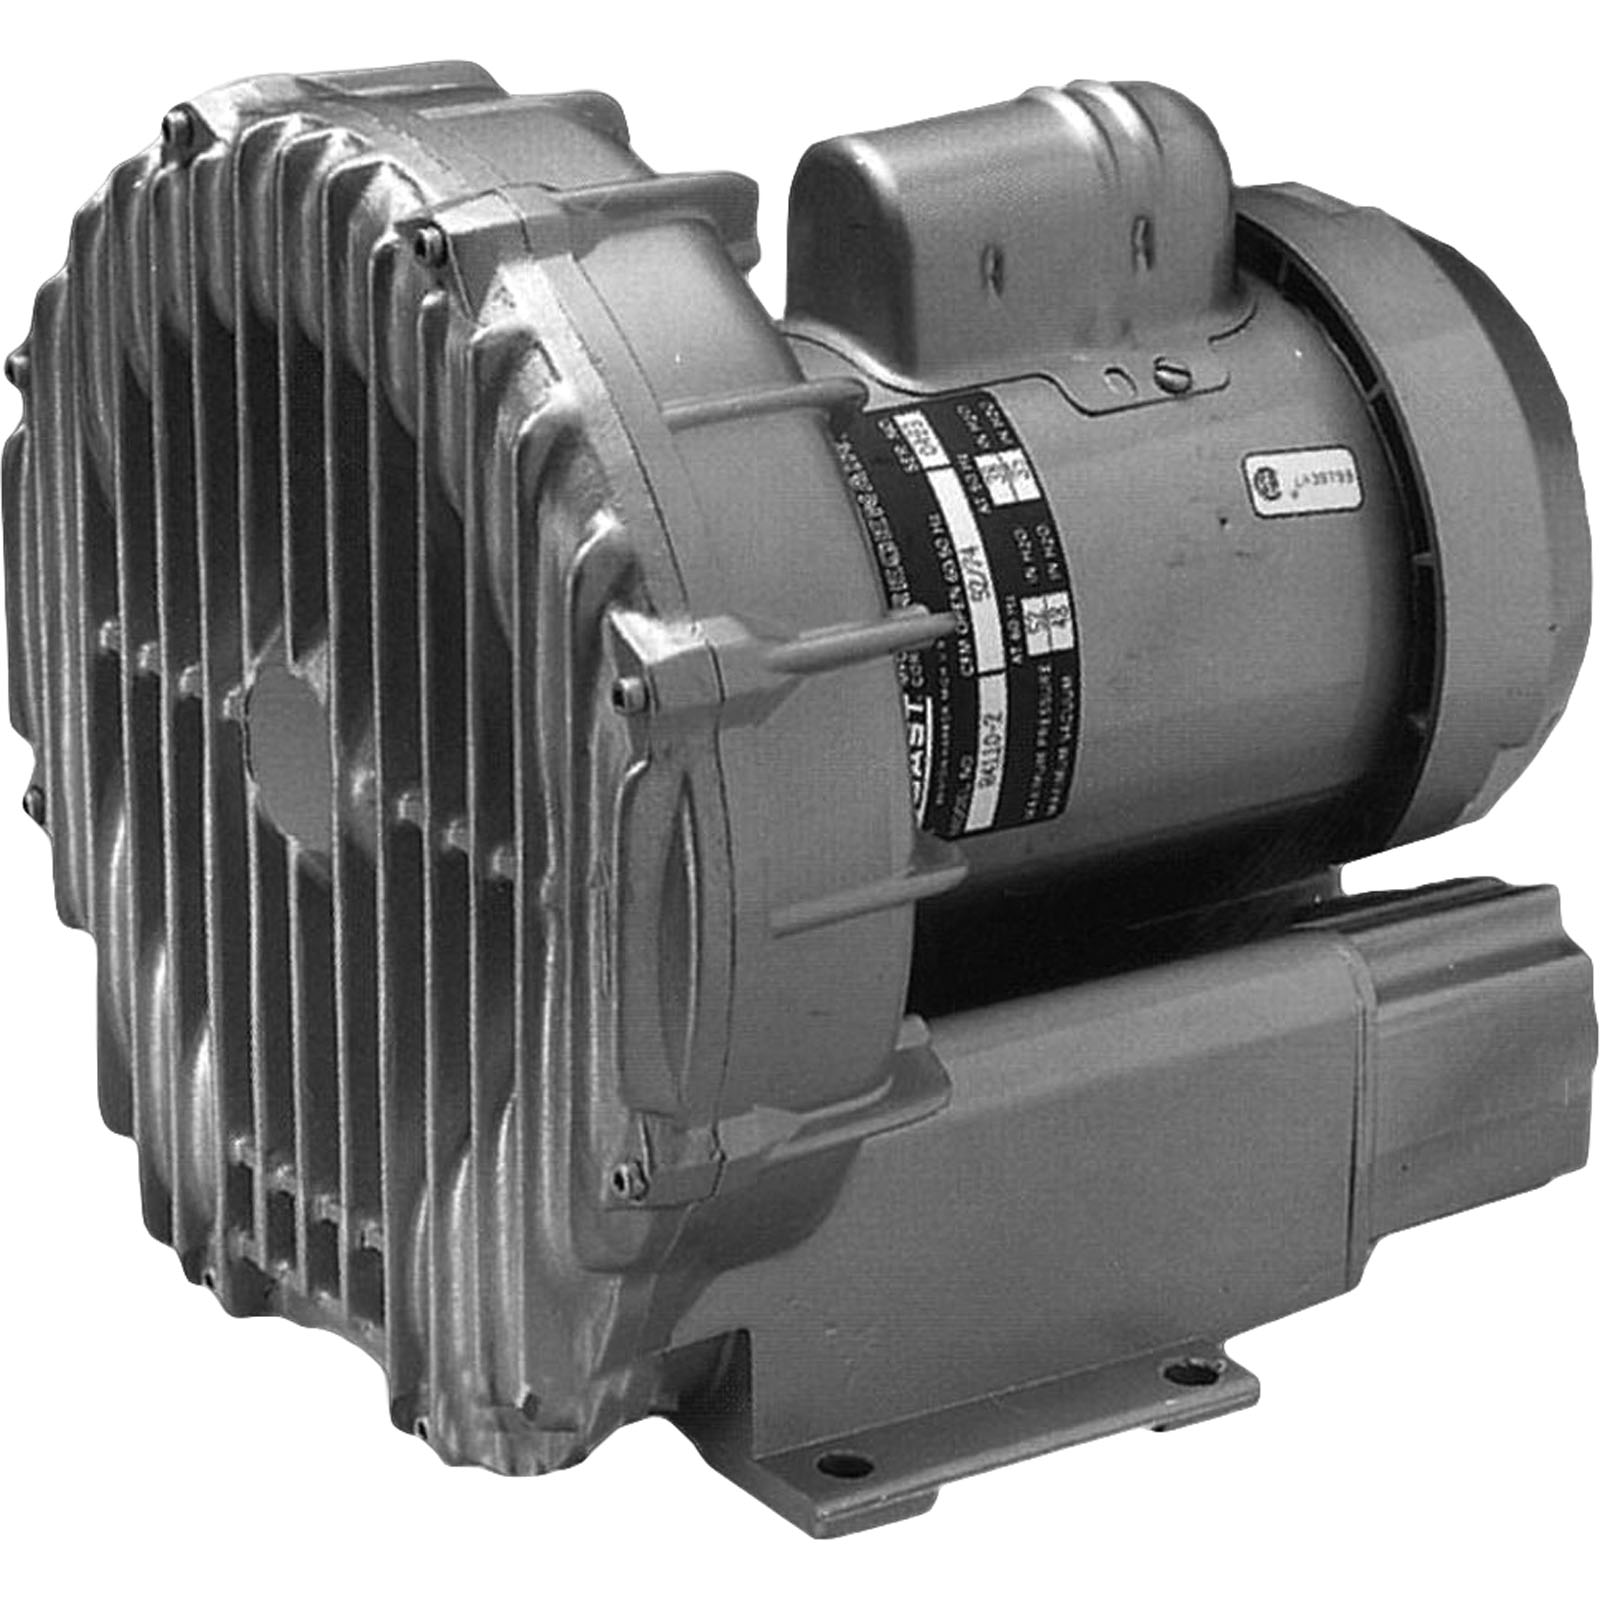 Picture of R4110-2 Commercial Blower Gast 1.0hp 115v/230v Single Phase